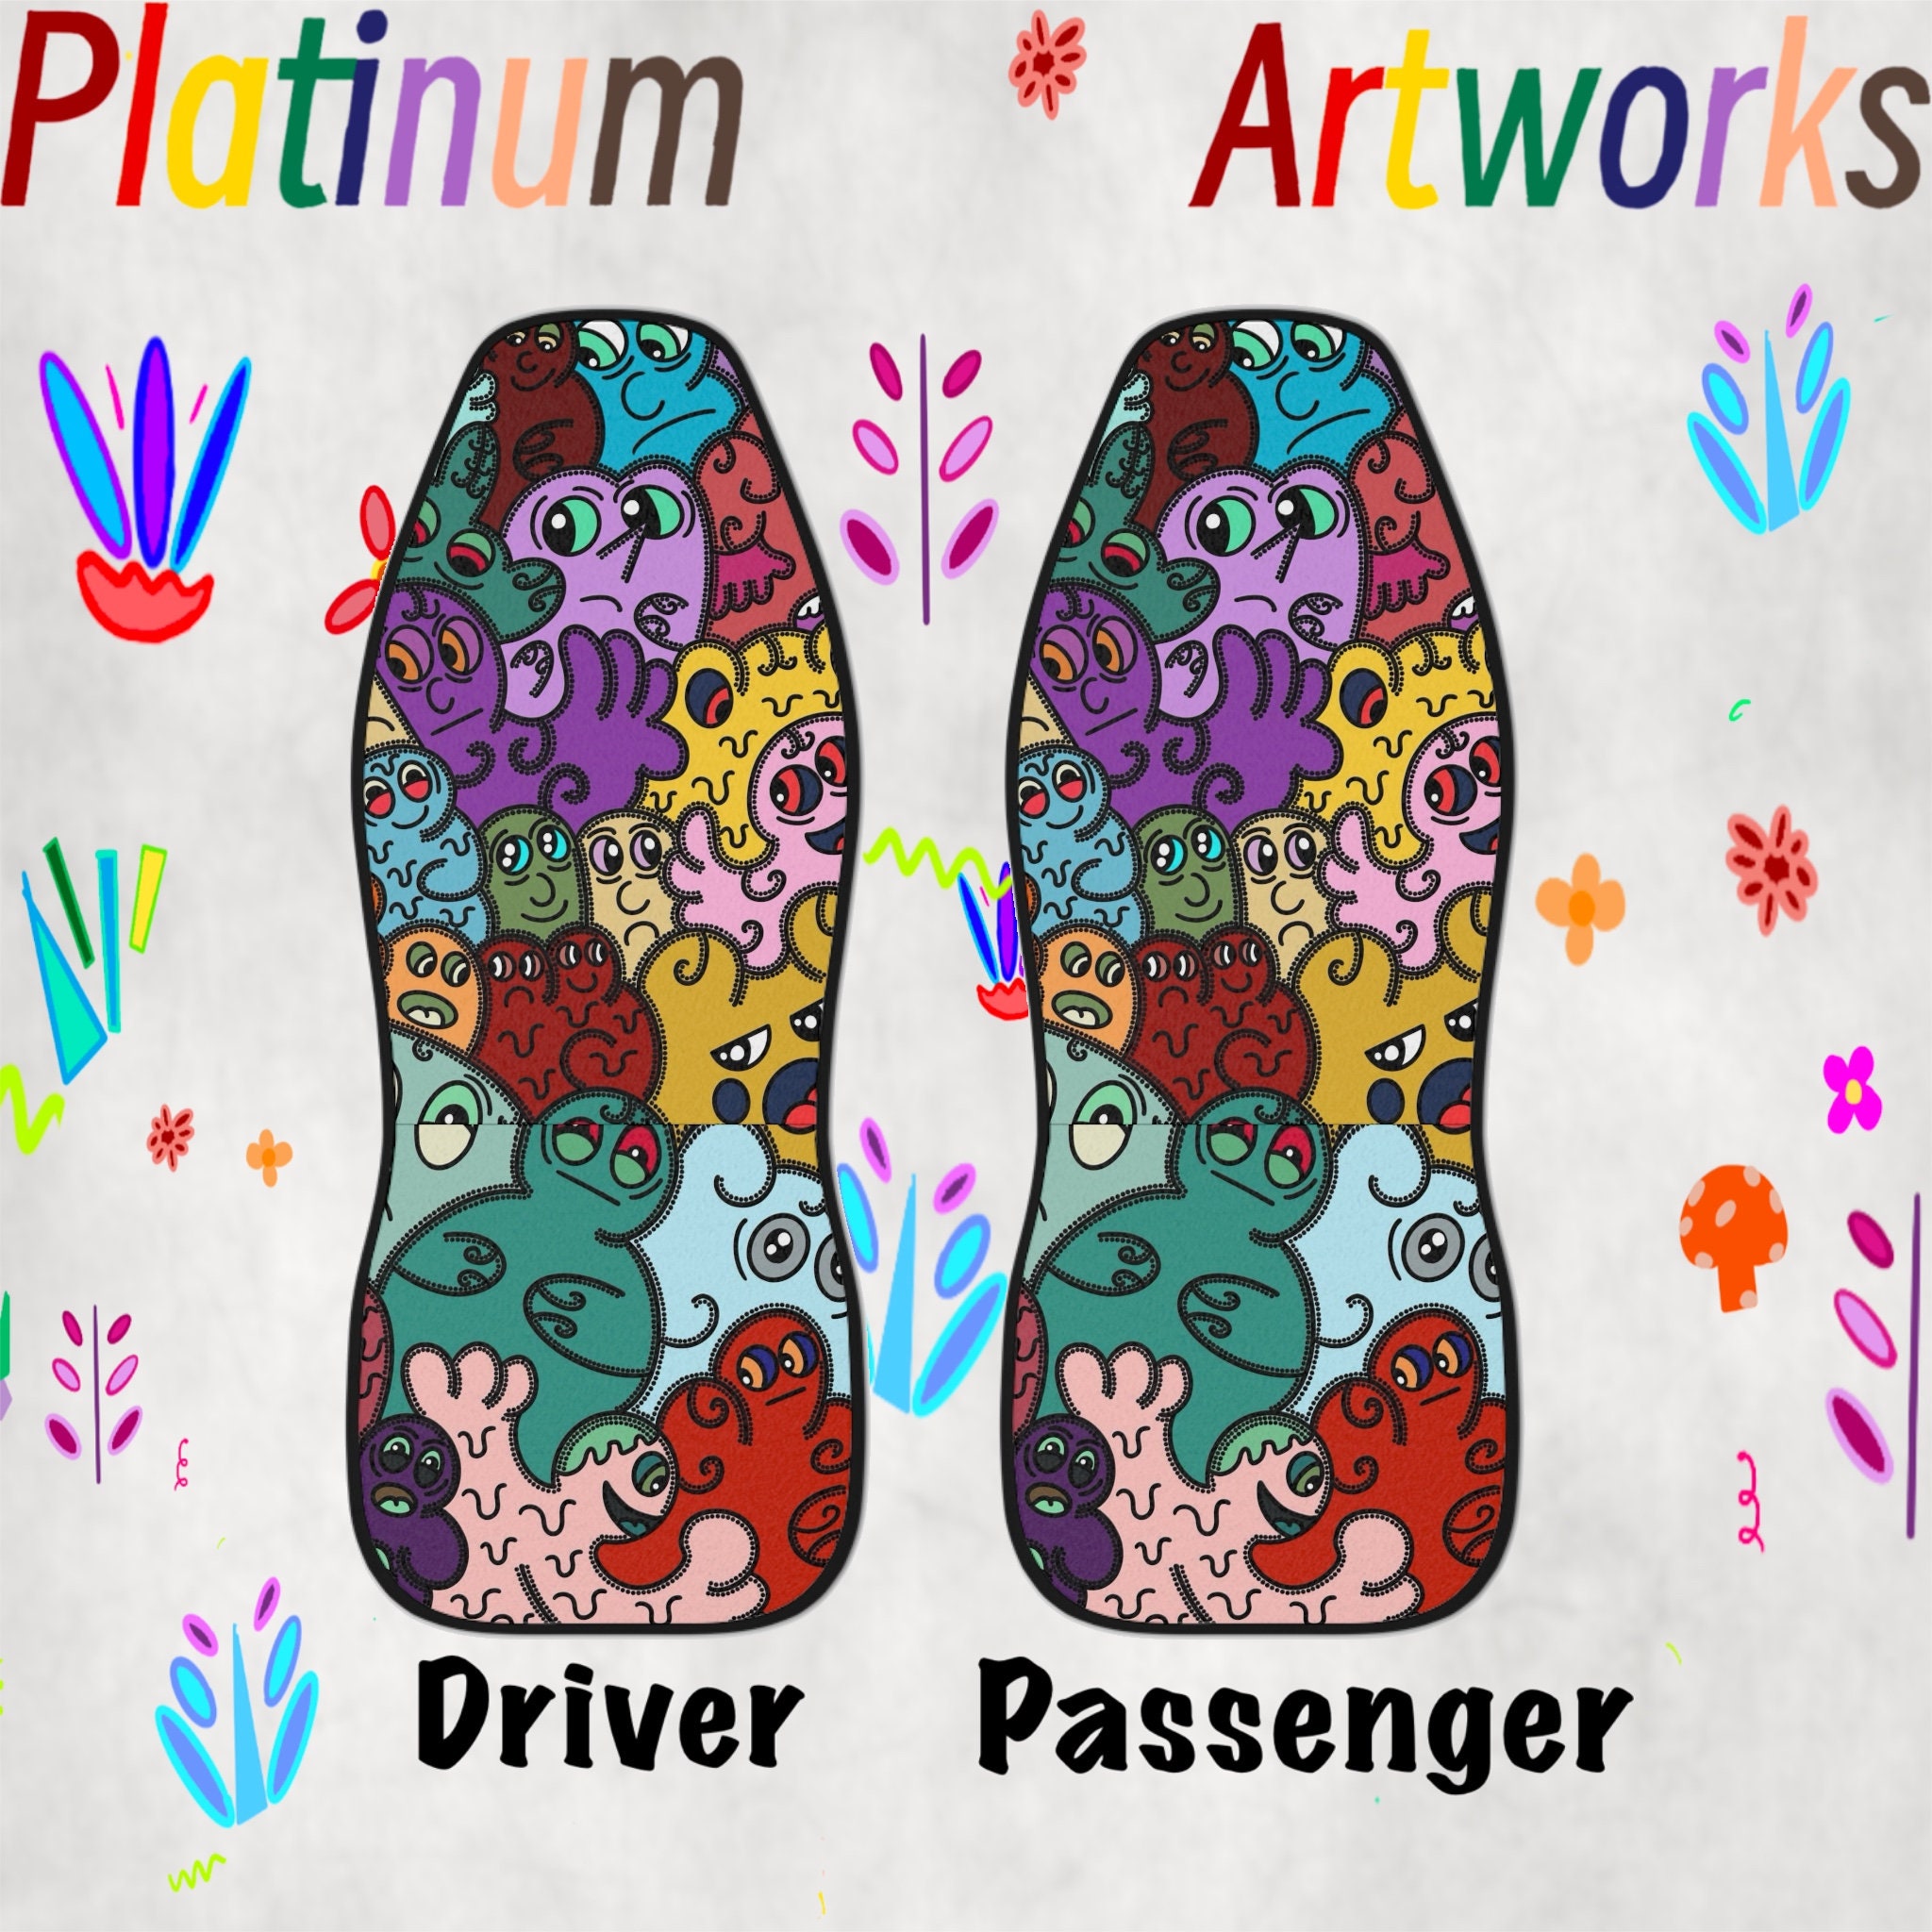 Discover Modern Art Seat Covers for Car, Pop Art Car Seat Covers, Contemporary Art Car Seat Cover, Cute Car Accessories, Gift for Women, Gift for Men